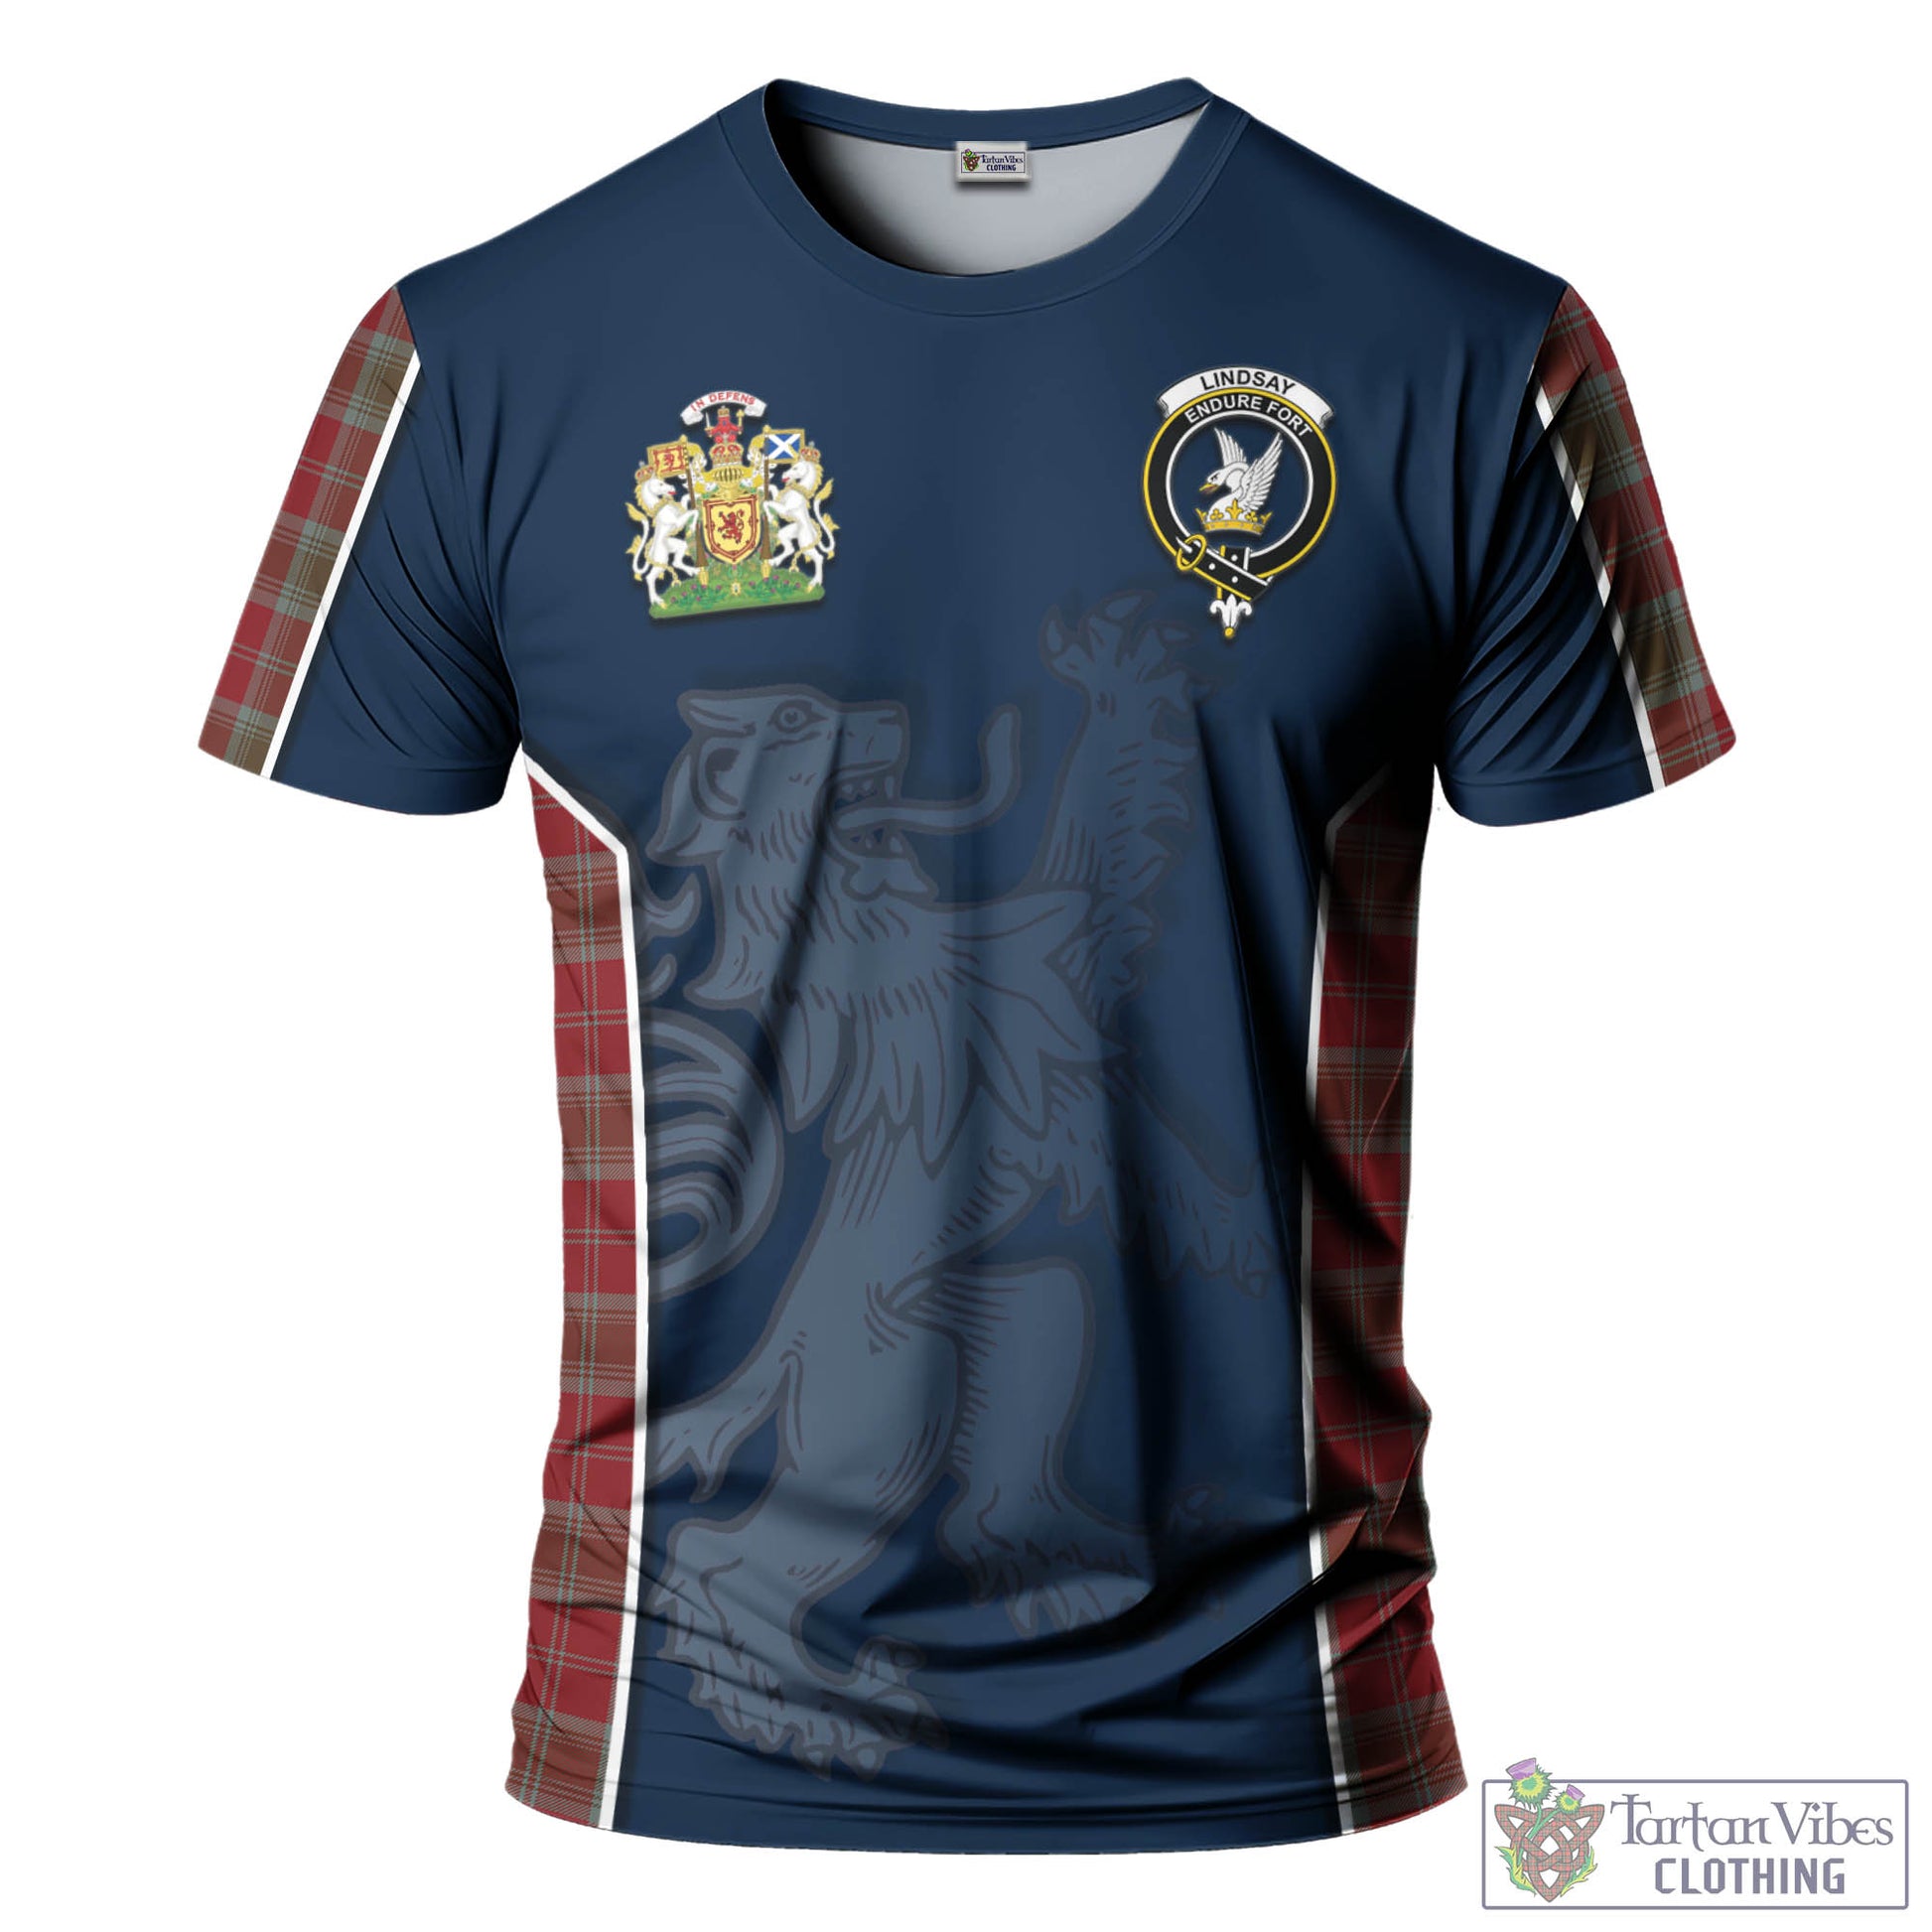 Tartan Vibes Clothing Lindsay Weathered Tartan T-Shirt with Family Crest and Lion Rampant Vibes Sport Style